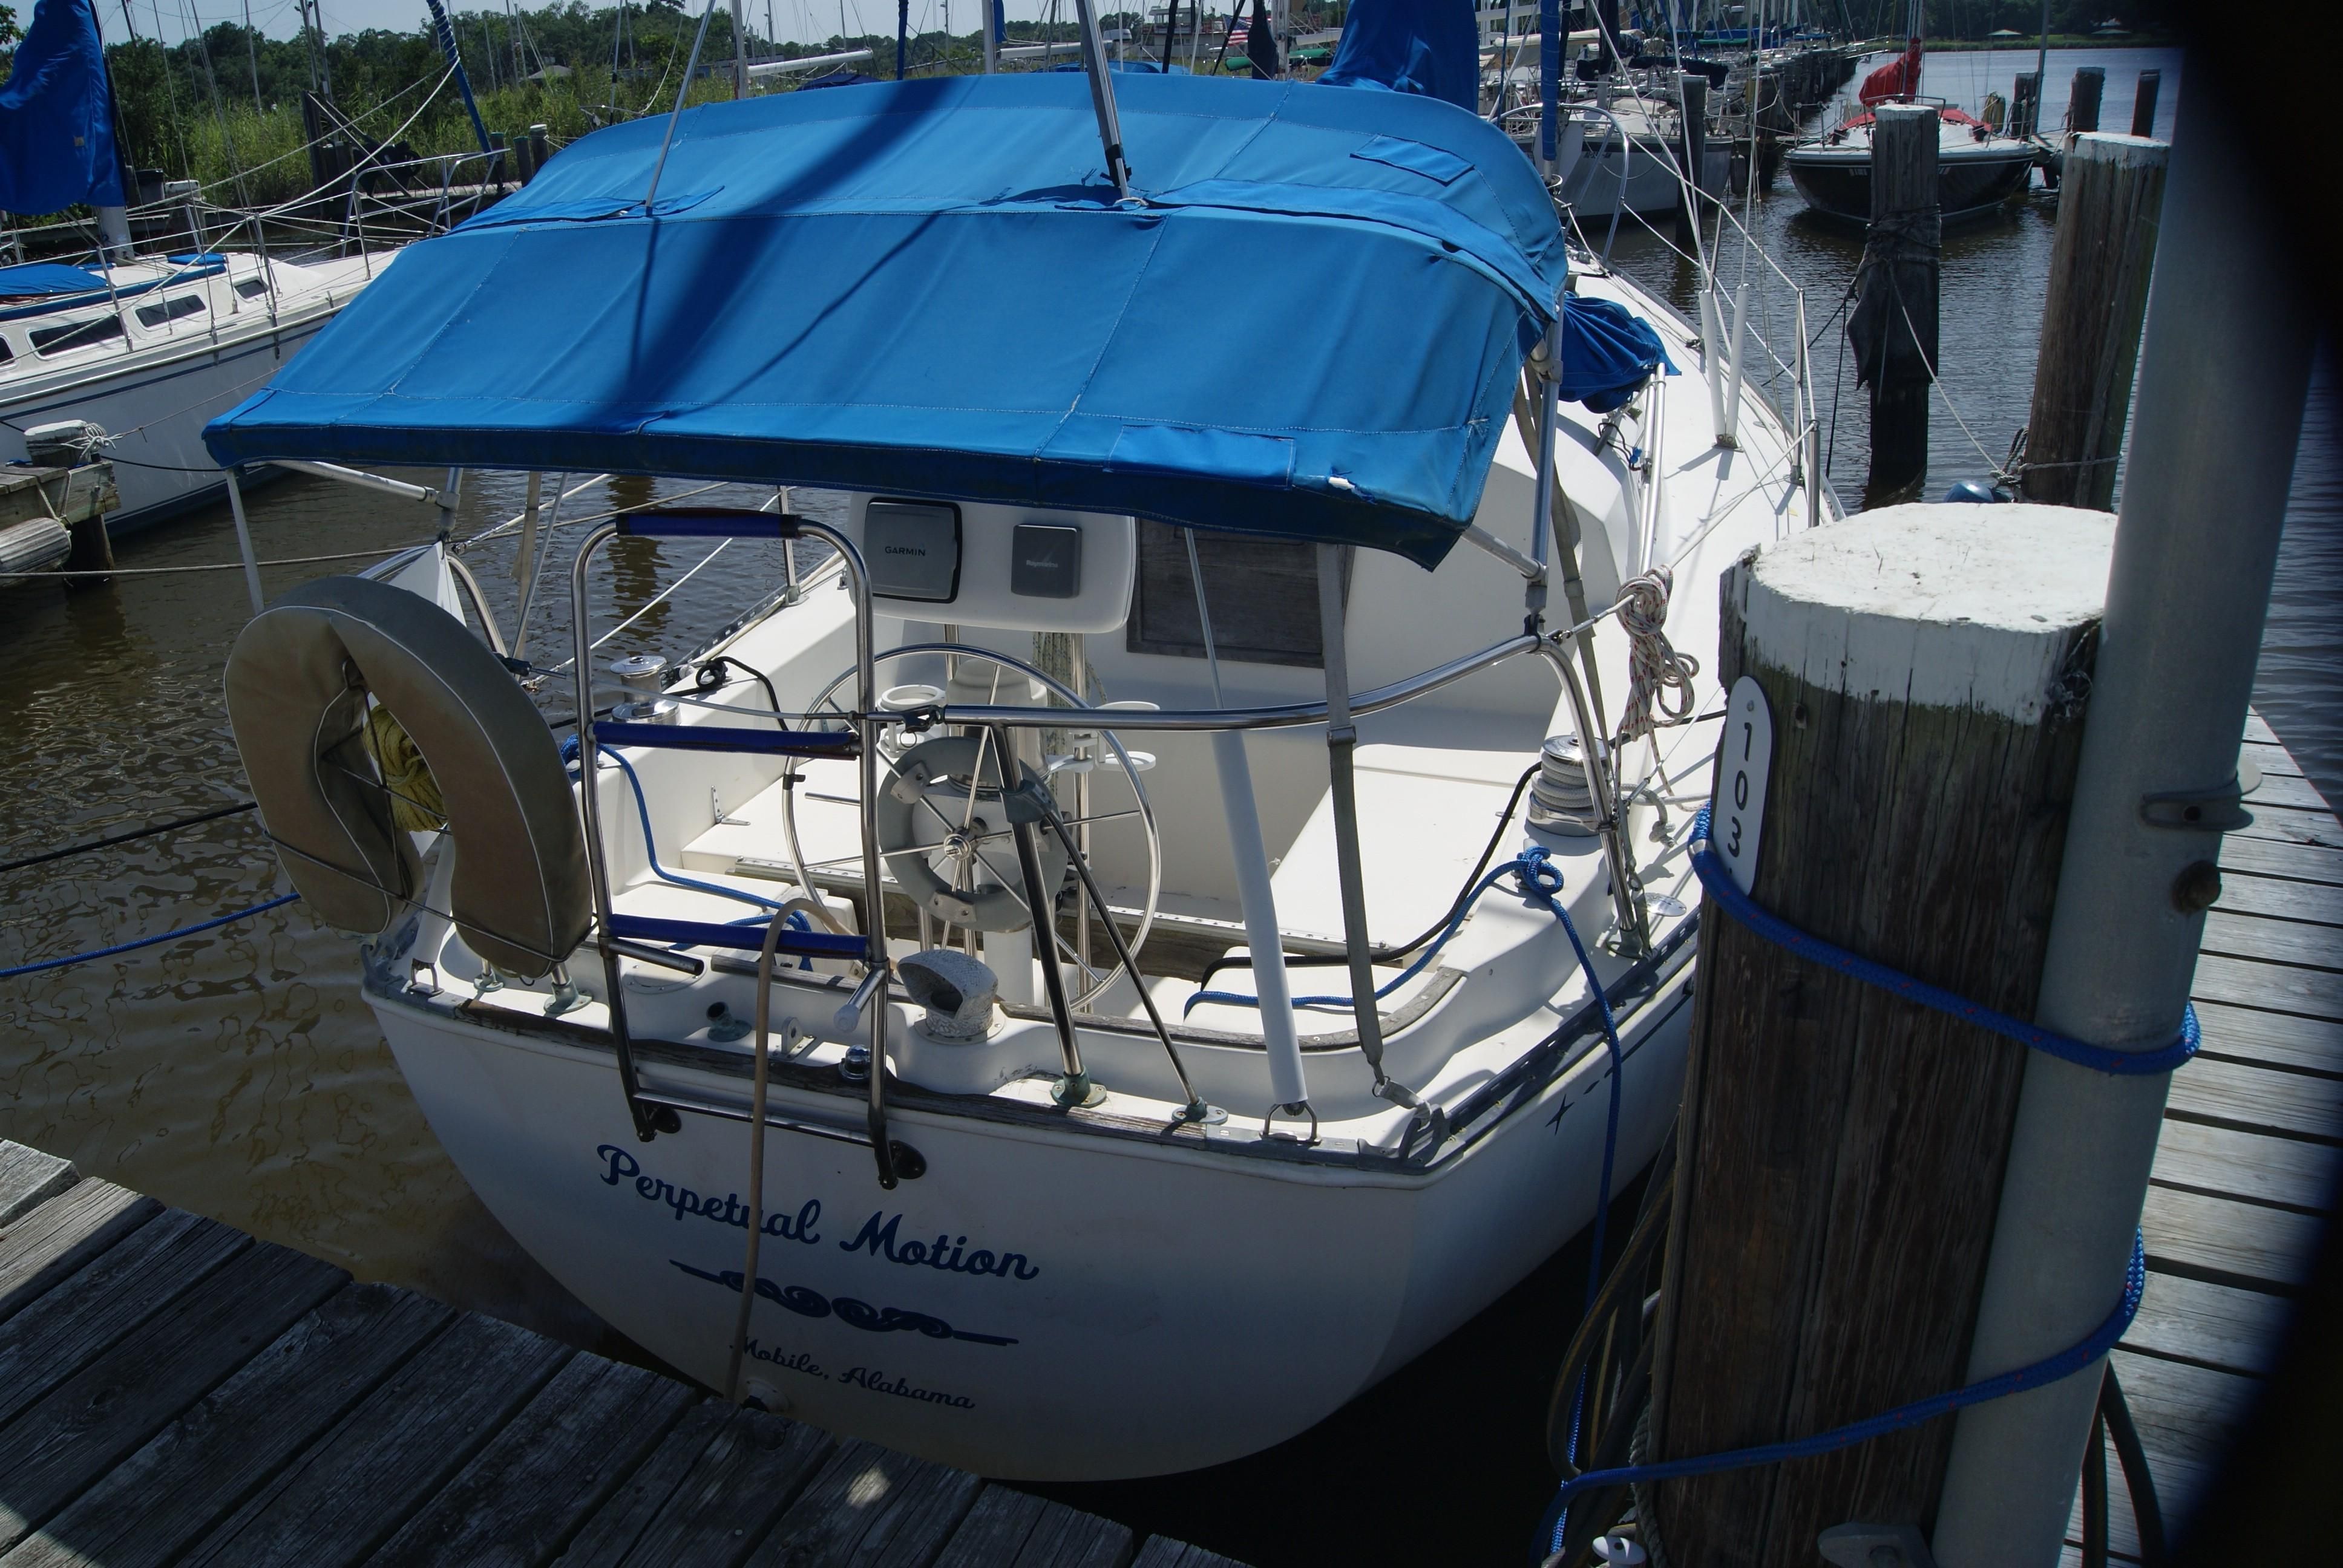 30 ft c&c sailboat for sale